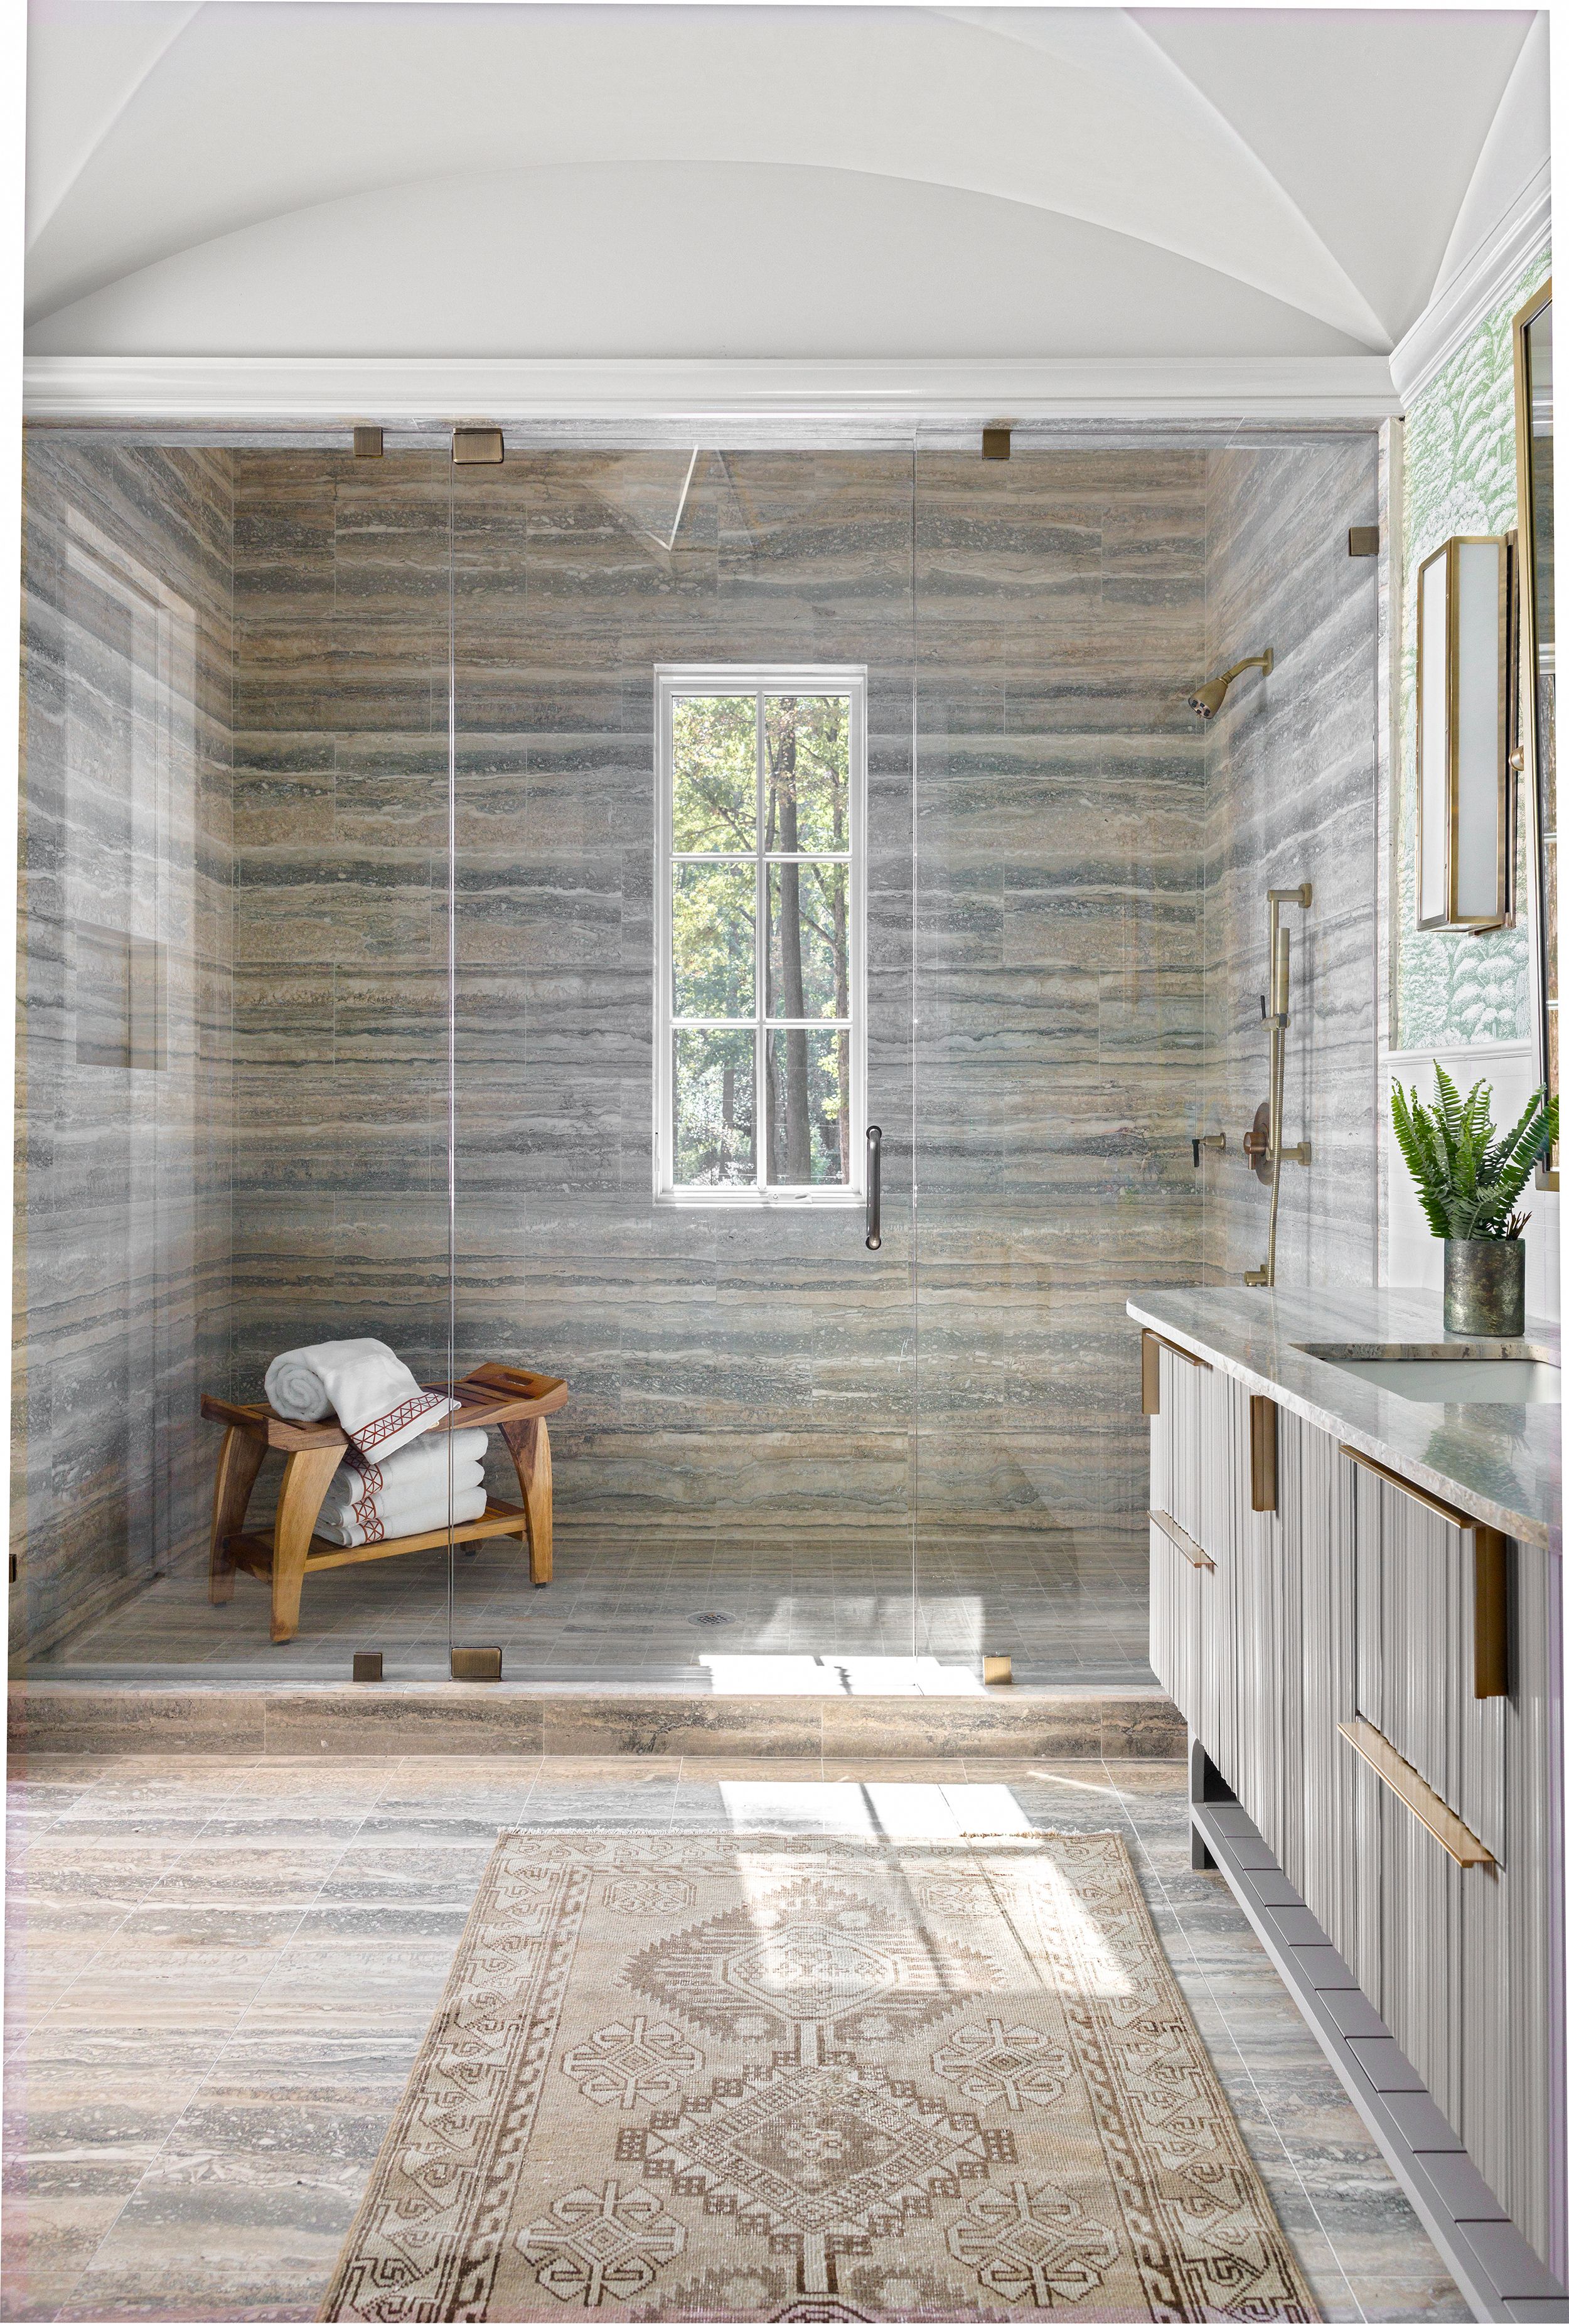 Bathroom Trends For 2023: The Design Trends For The Bath Next Year